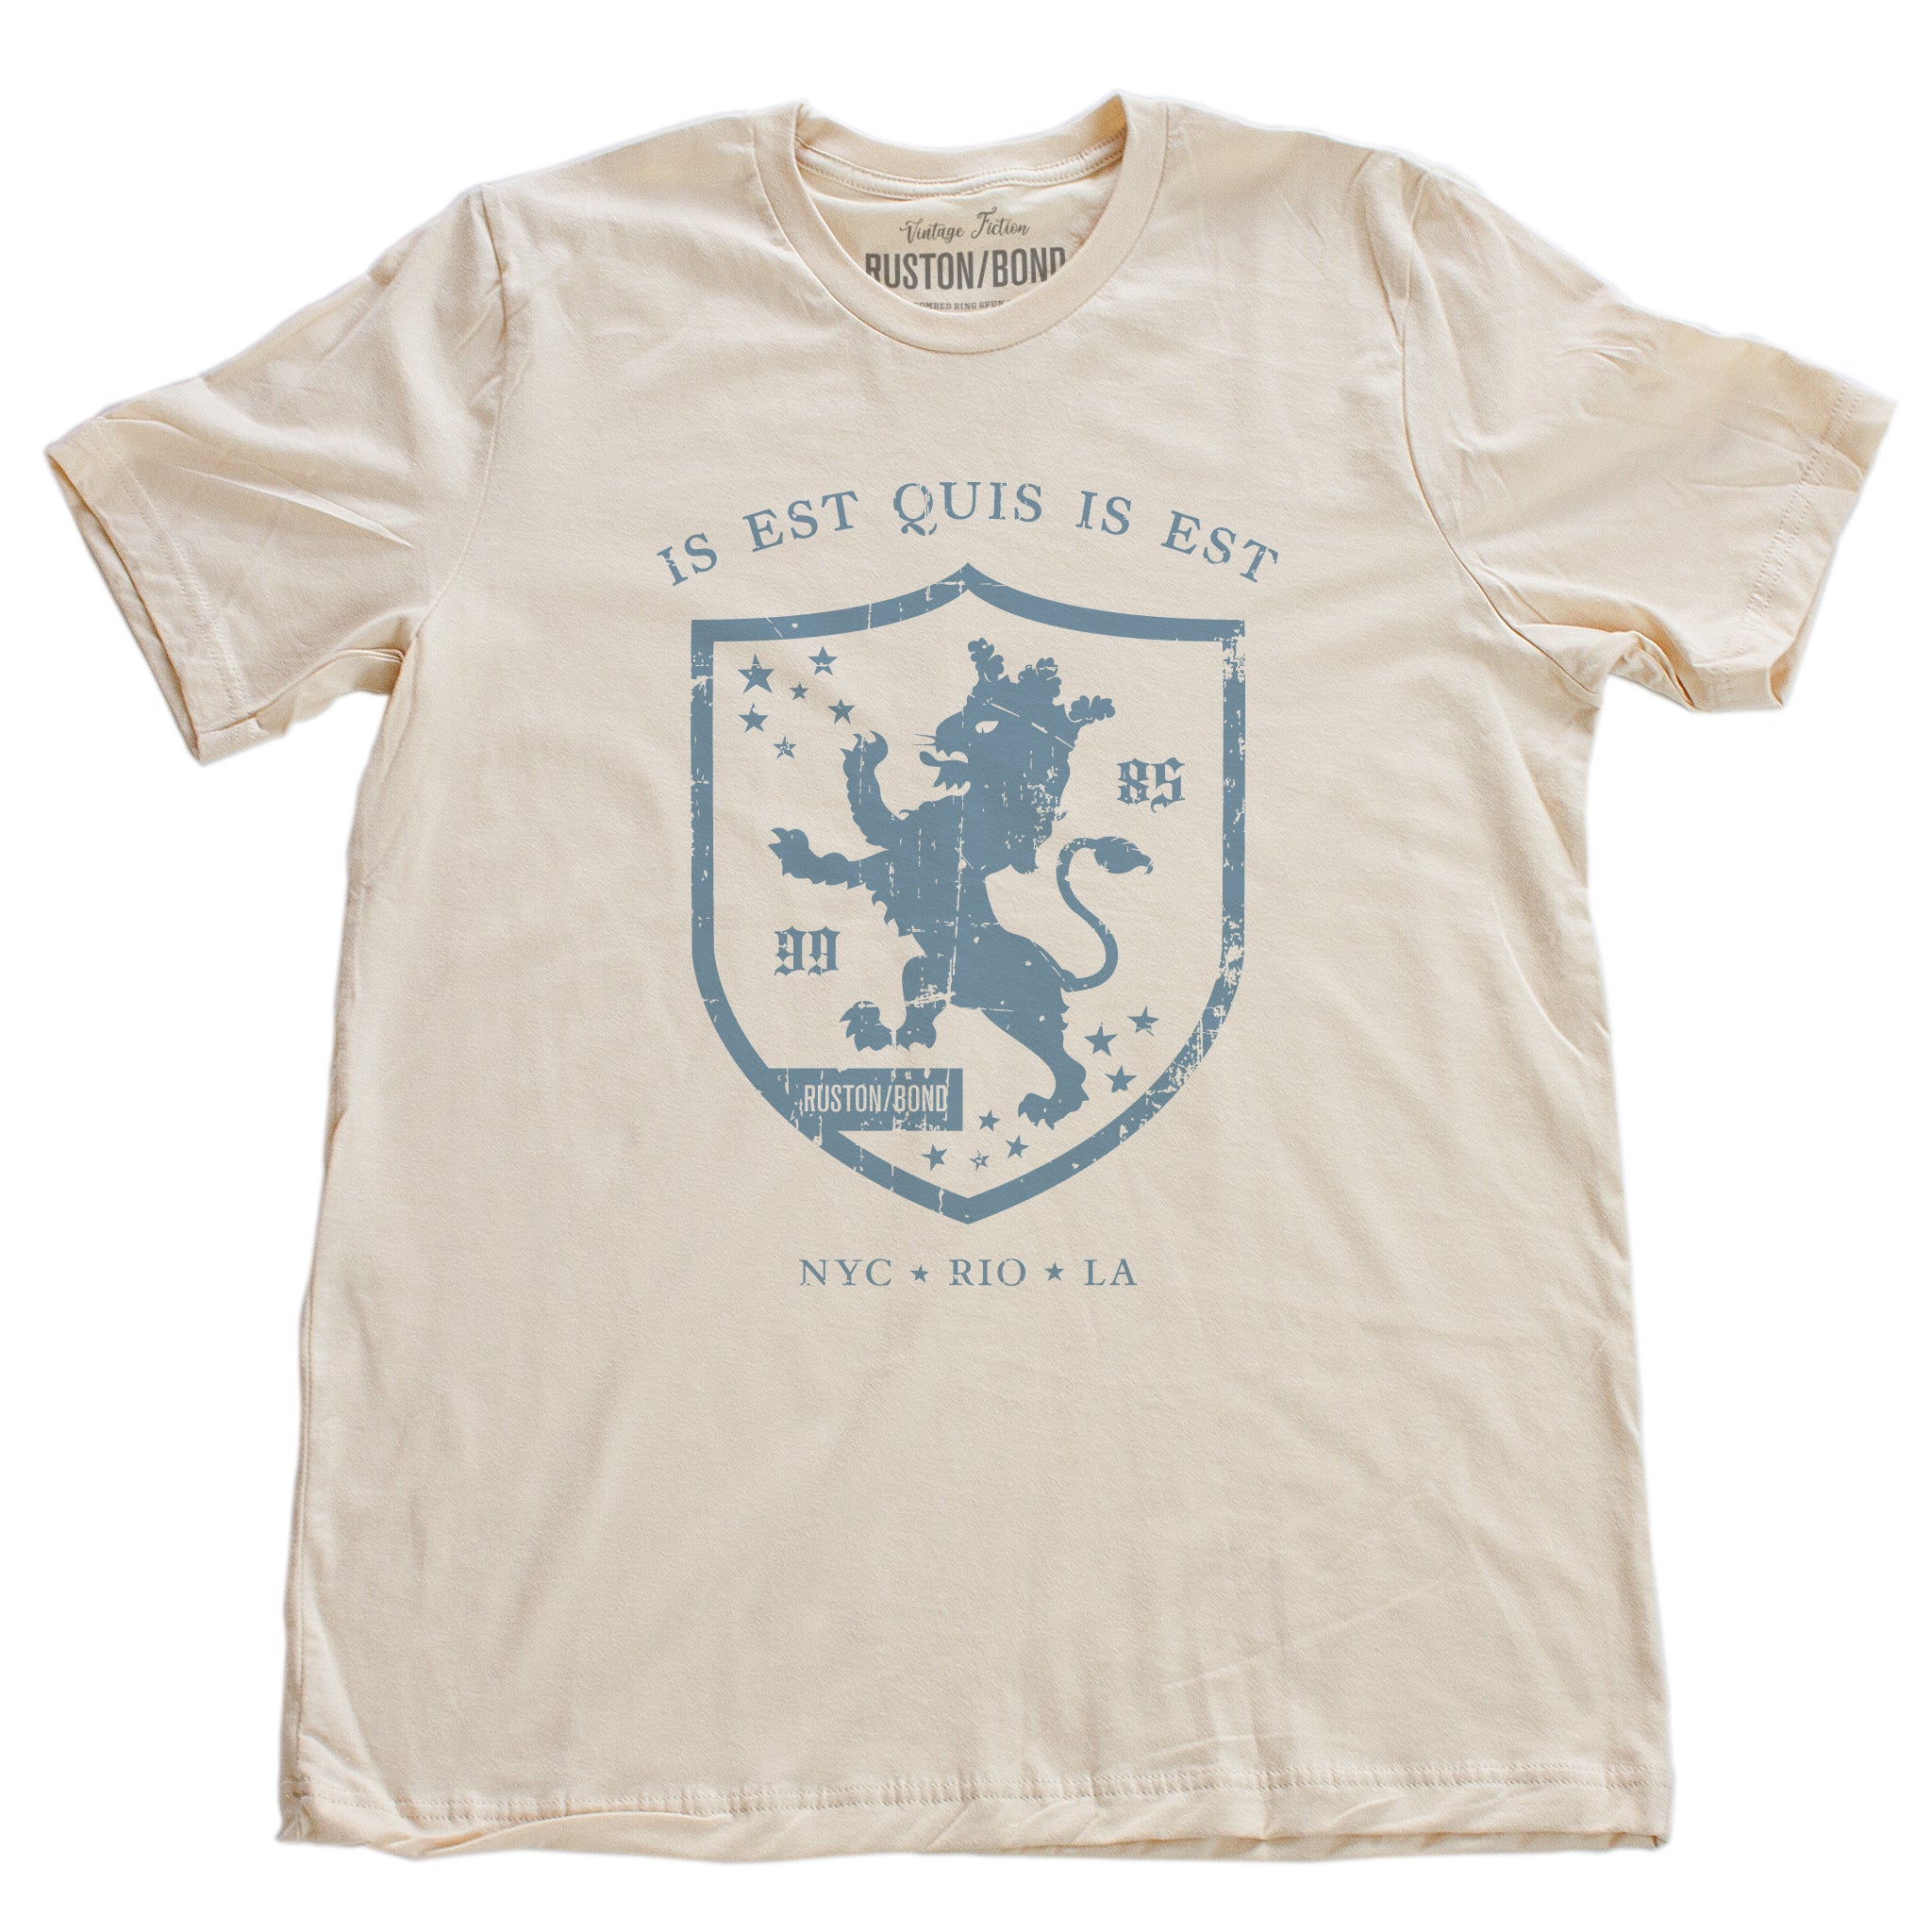 A retro, vintage-inspired fashion t-shirt in Soft Cream, with an medieval graphic of a lion within a shield,surrounded by the sarcastic text in Latin “it is what it is,” and New York, Rio, Los Angeles at the bottom. By fashion brand Ruston/Bond, from wolfsaint.net